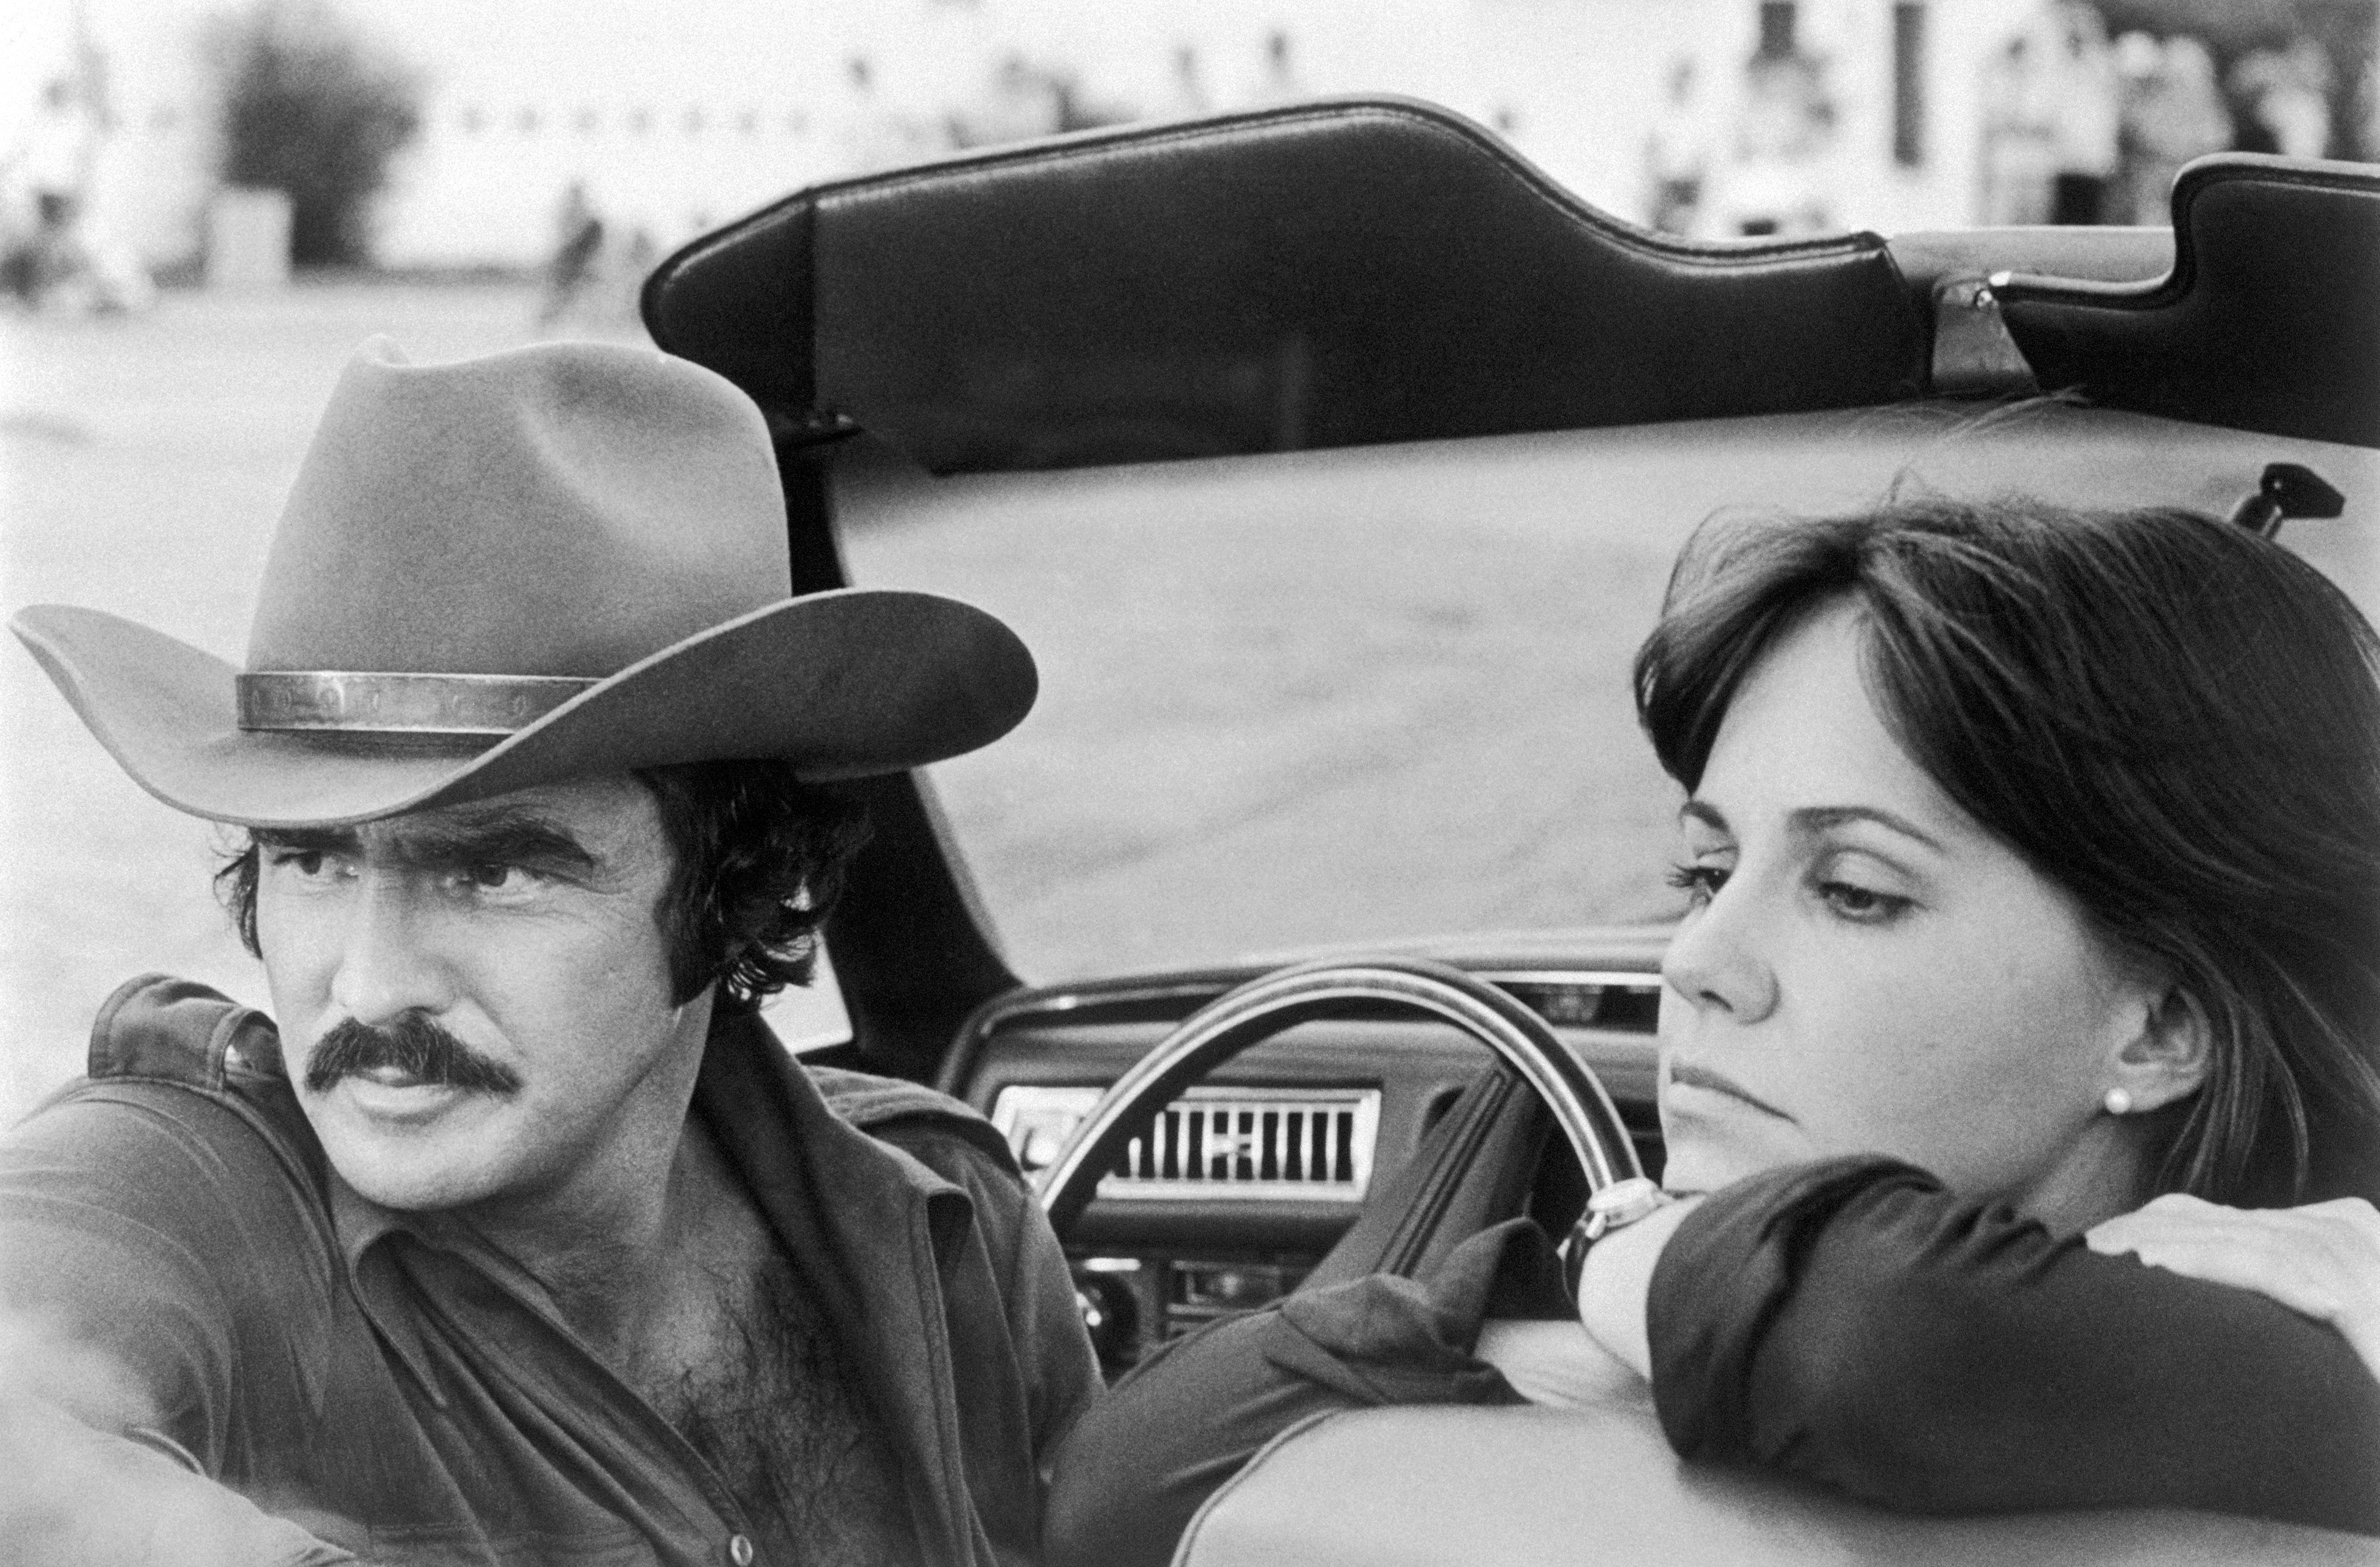 Burt Reynolds and Sally Field in a scene from "Smokey and the Bandit" | Source: Getty Images